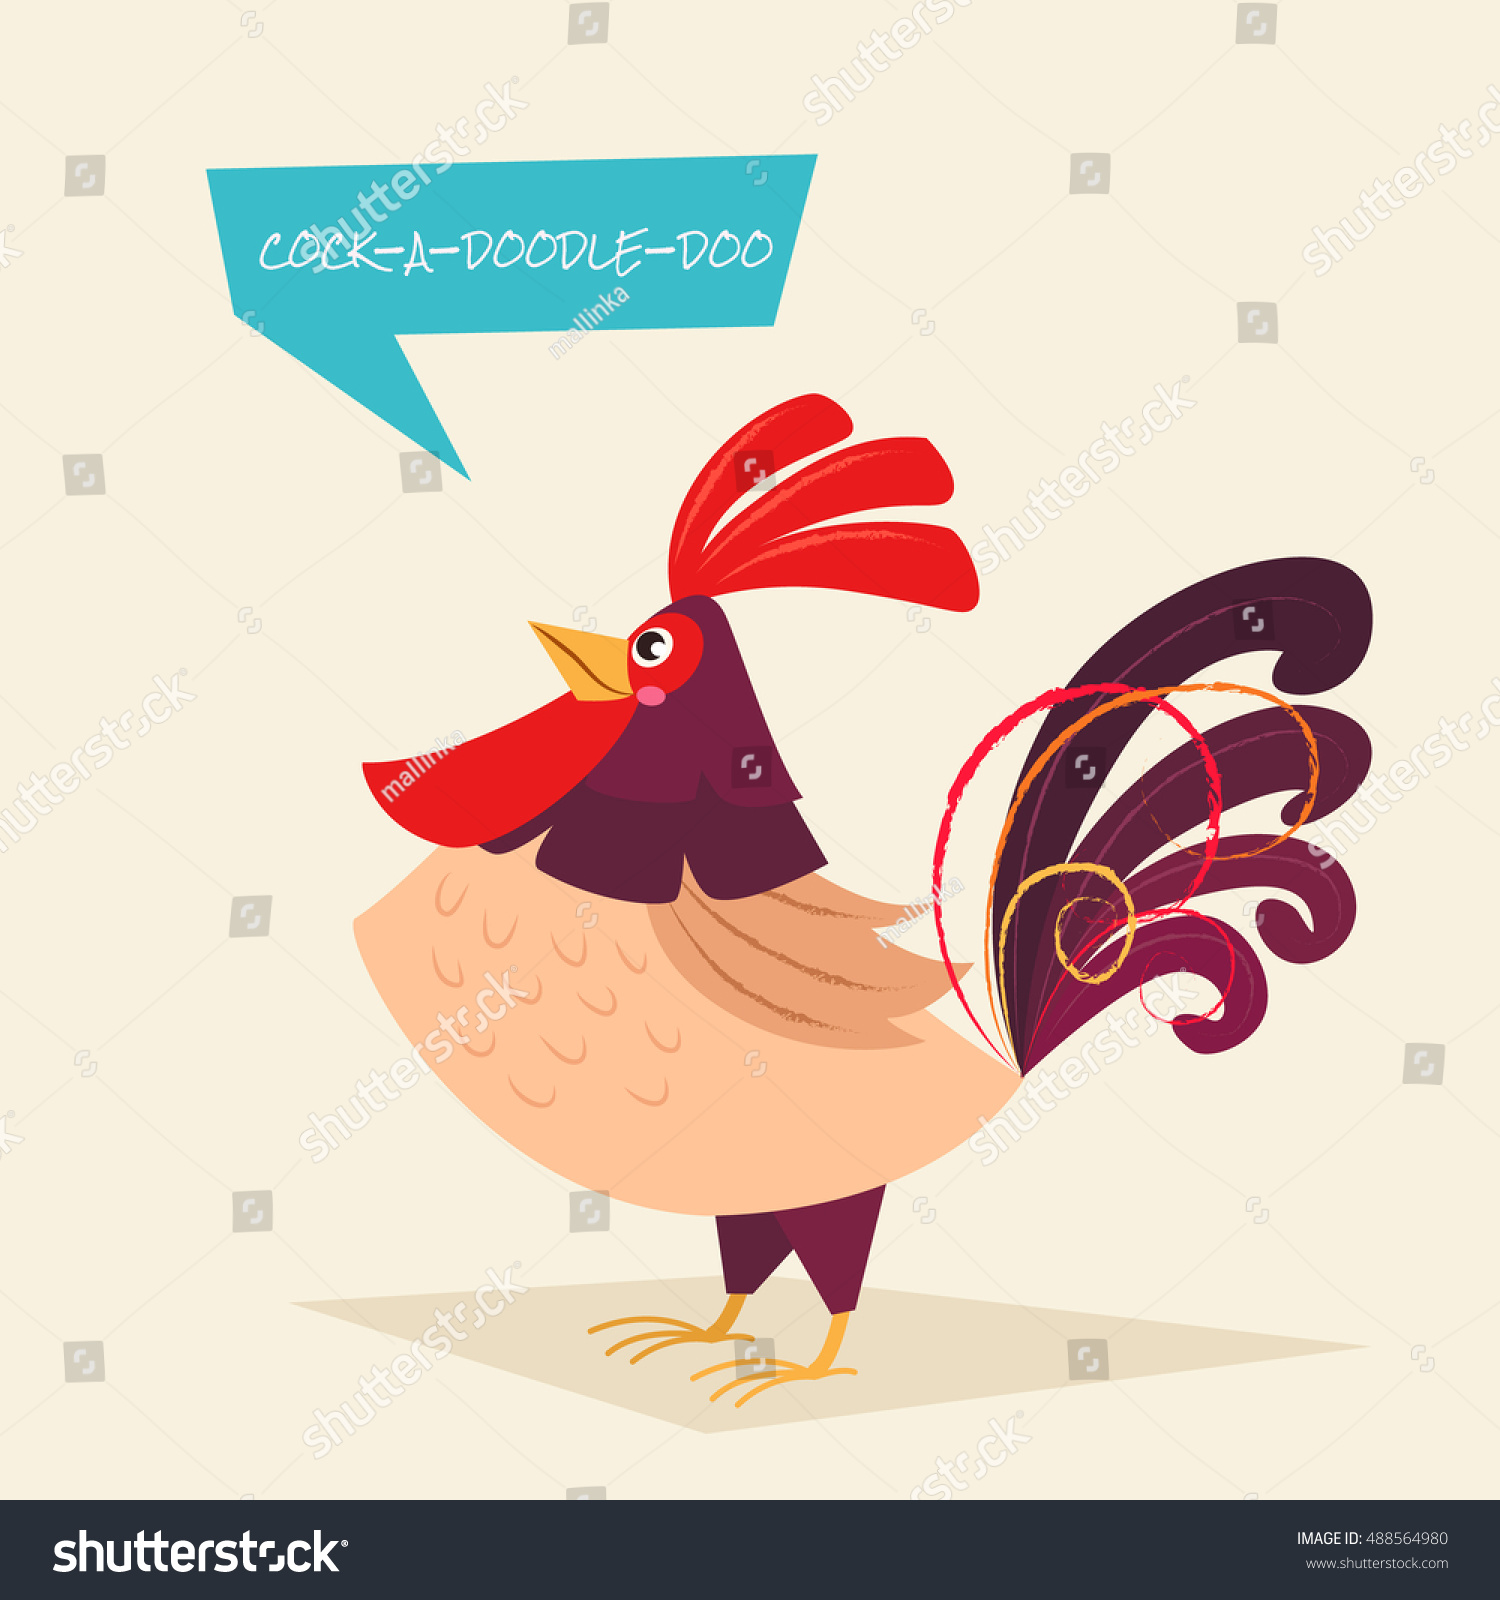 SVG of Stylized rooster on a light background. Vector illustration of rooster, symbol of 2017 on the Chinese calendar. Element for New Year's design. Cartoon character. svg